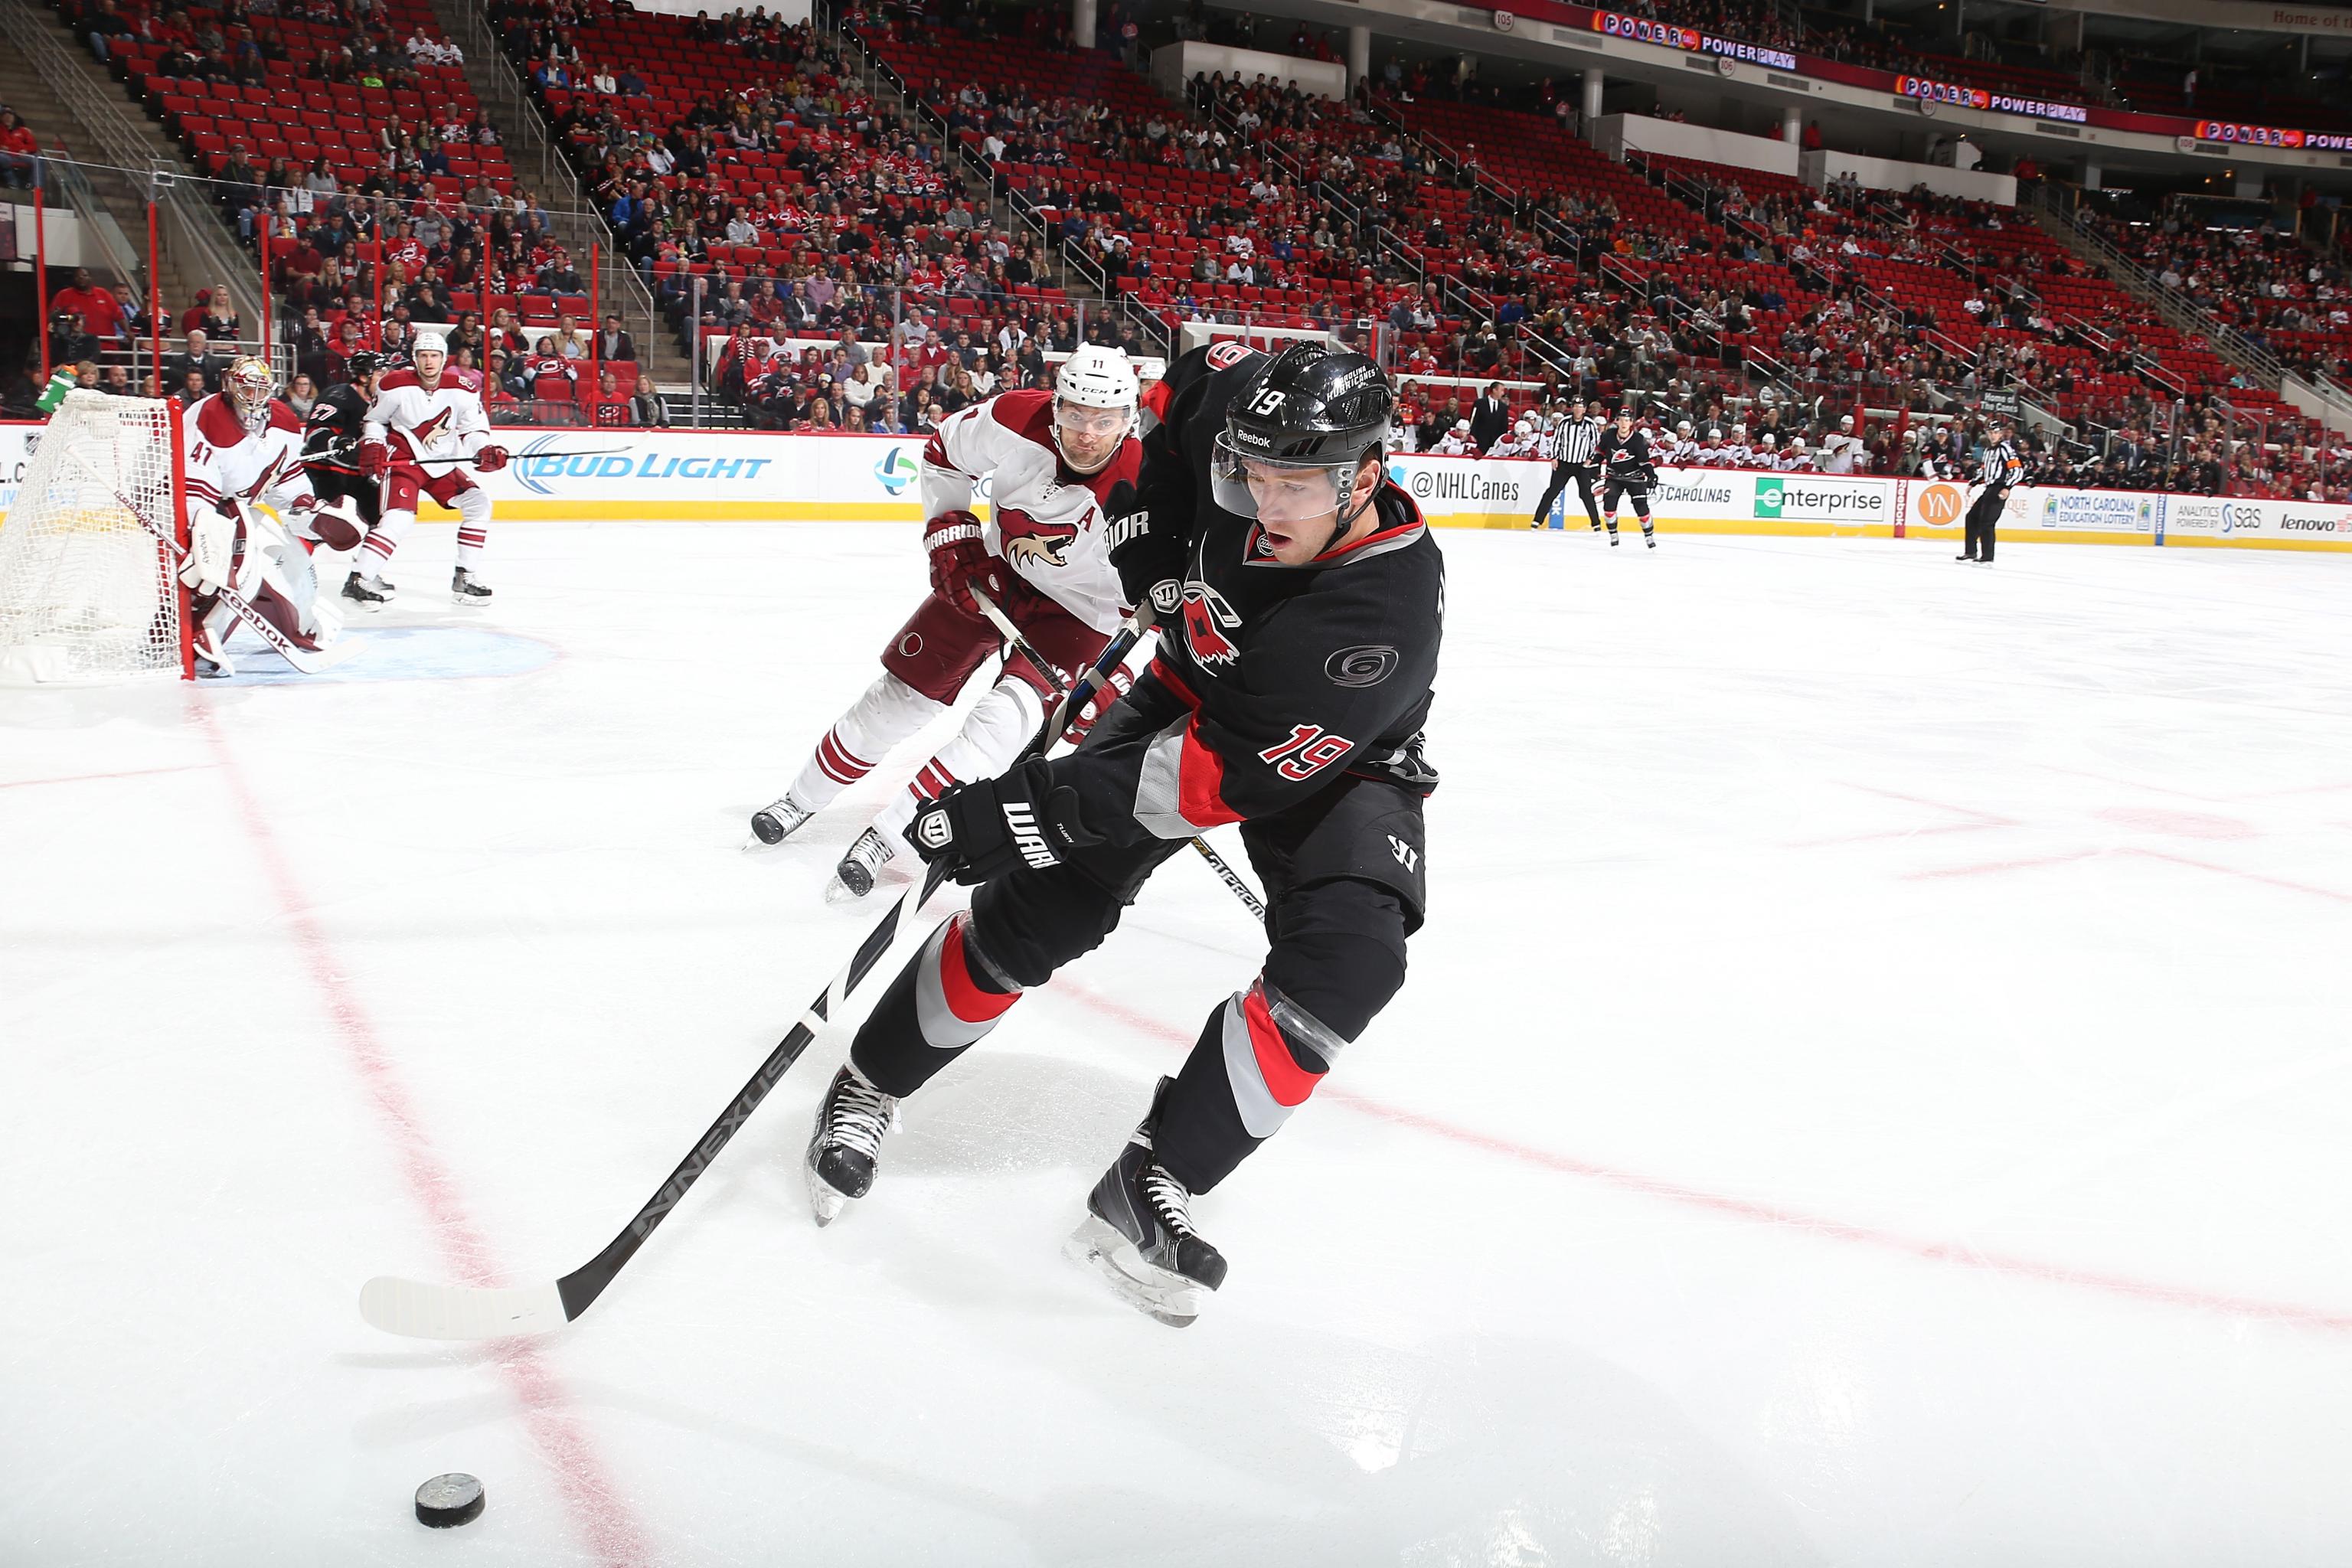 Carolina Hurricanes: Attendance at PNC Arena on the rise